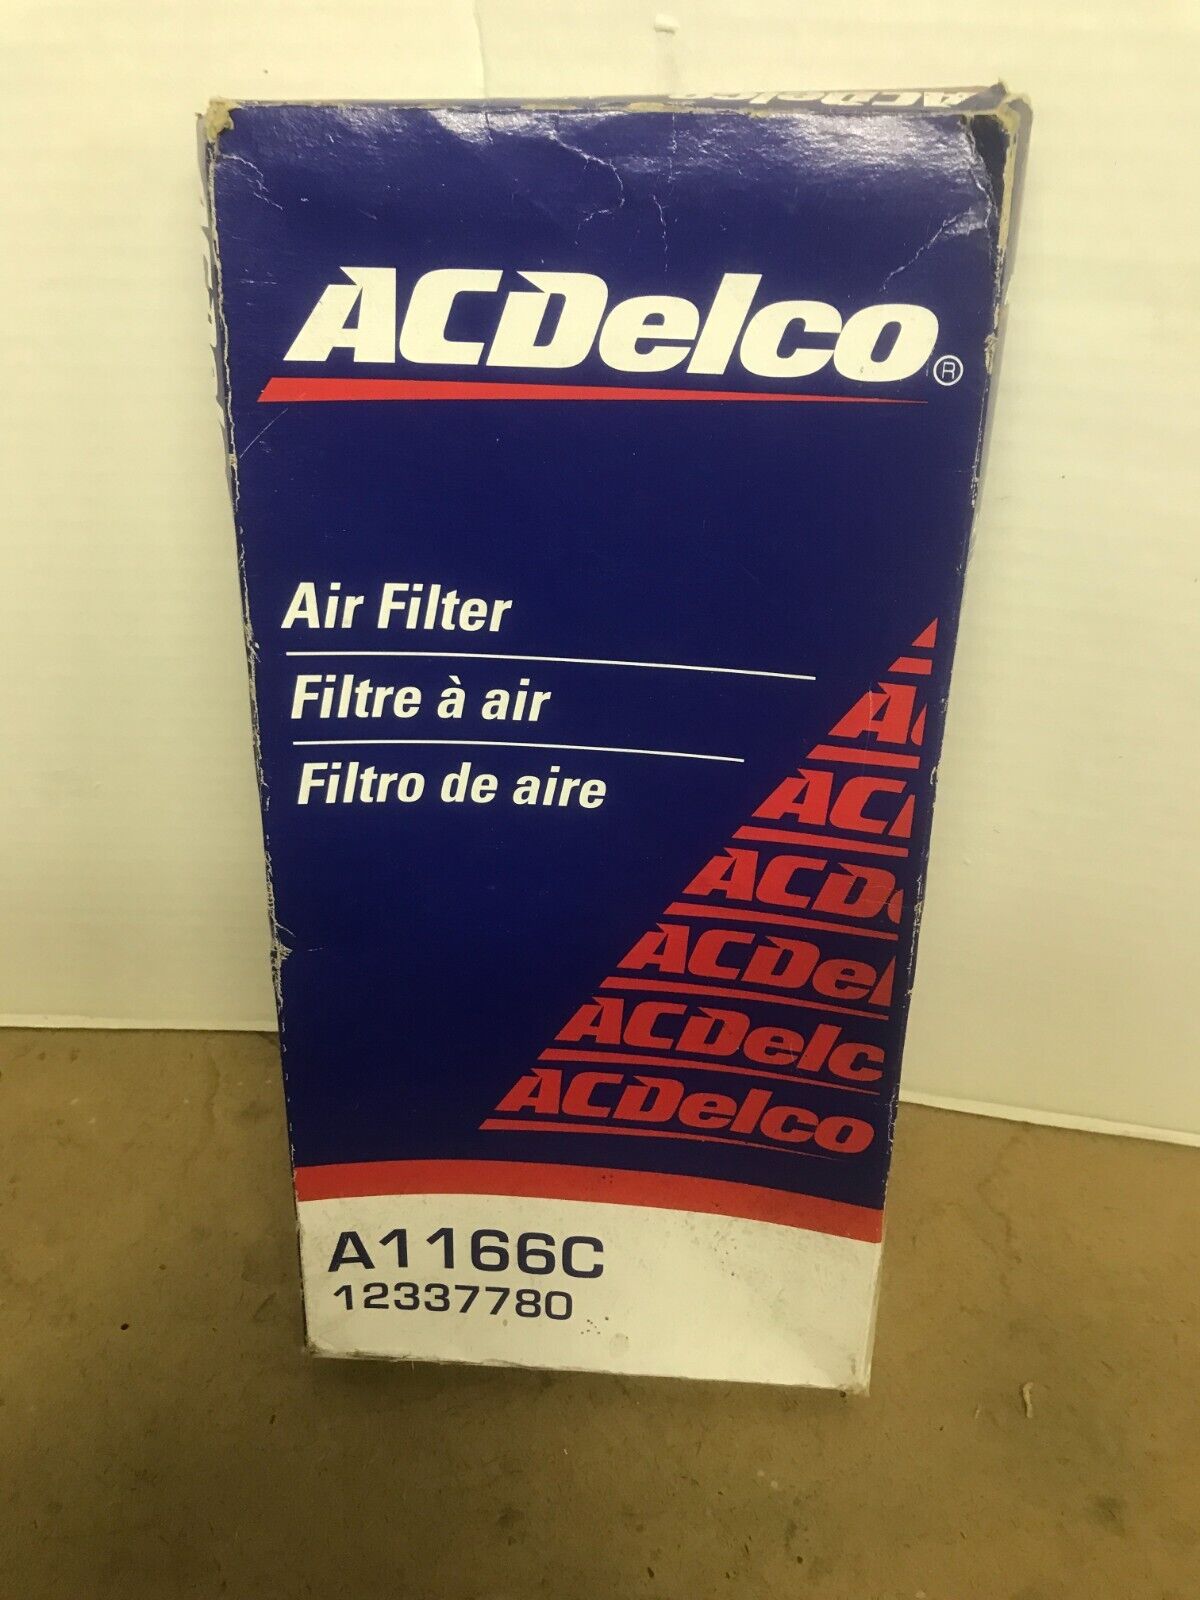 A1166C AC Delco Air Filter New for Ram Van Truck Dodge 1500 Jeep Cherokee 2500